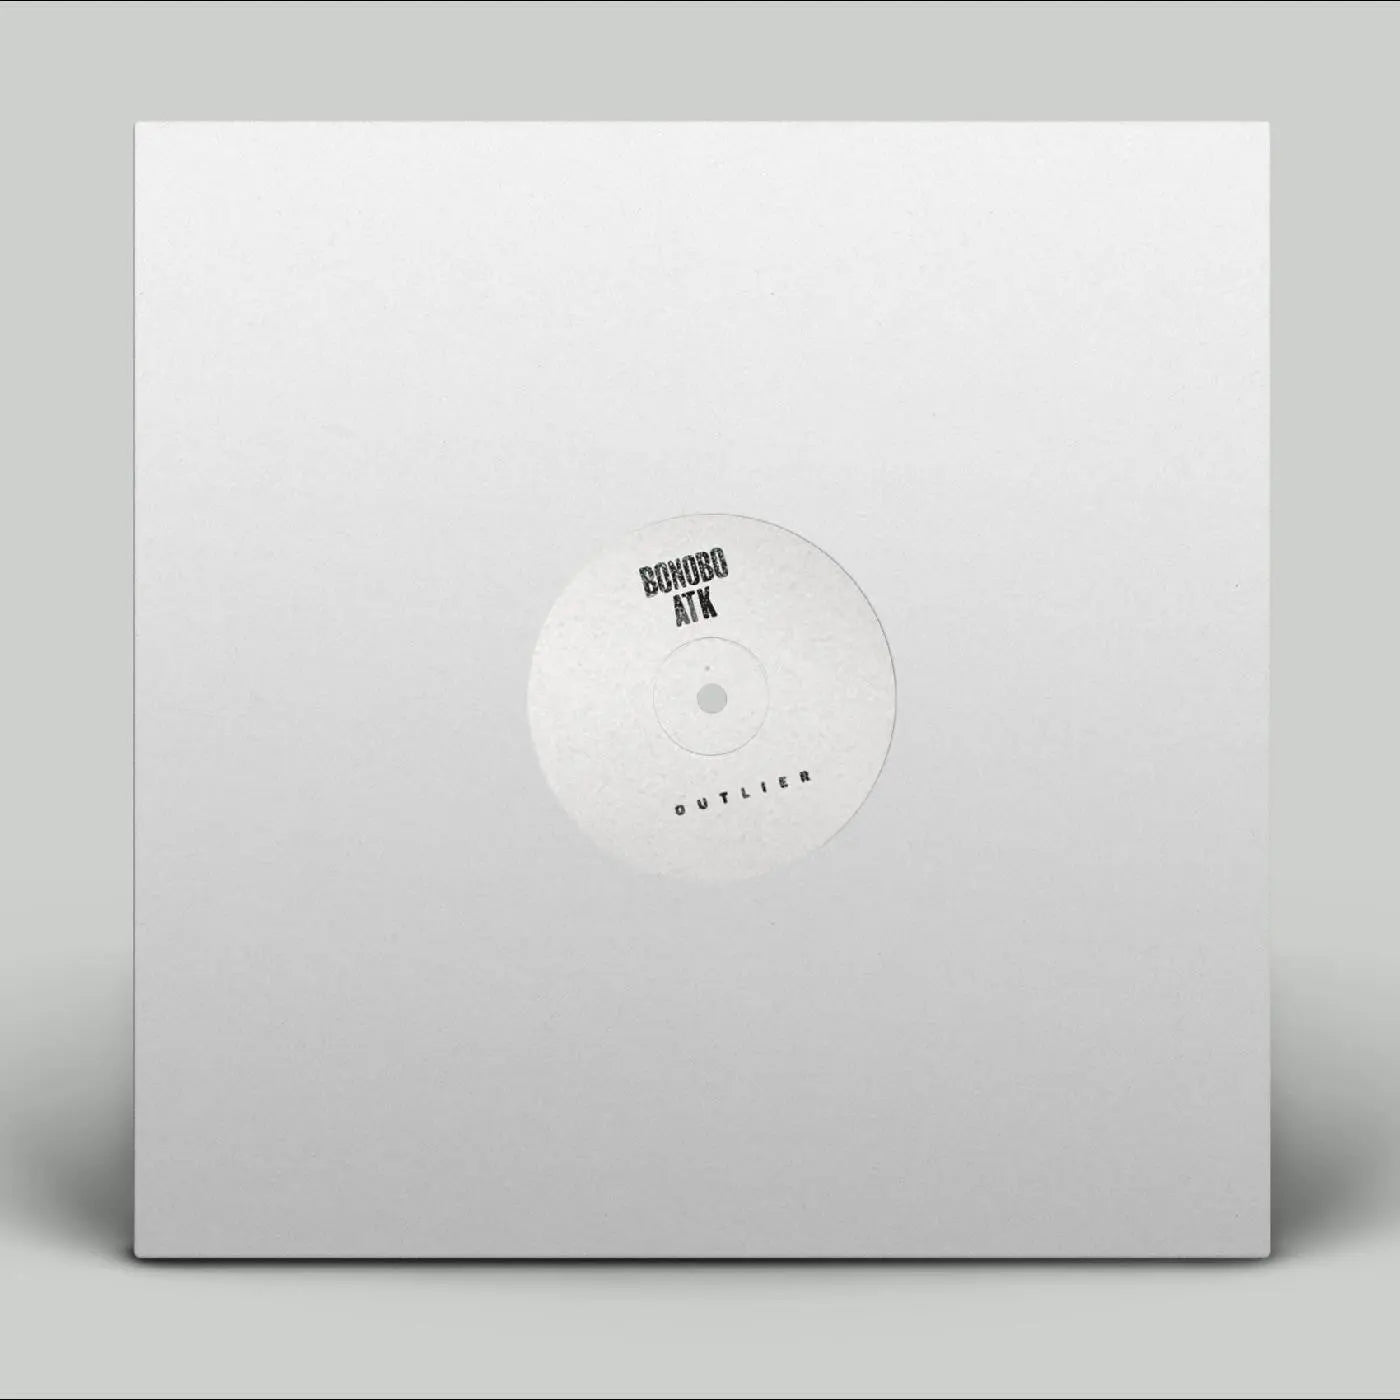 Bonobo - ATK [12" Vinyl 140g Limited Edition Hand Numbered & Hand Stamped]